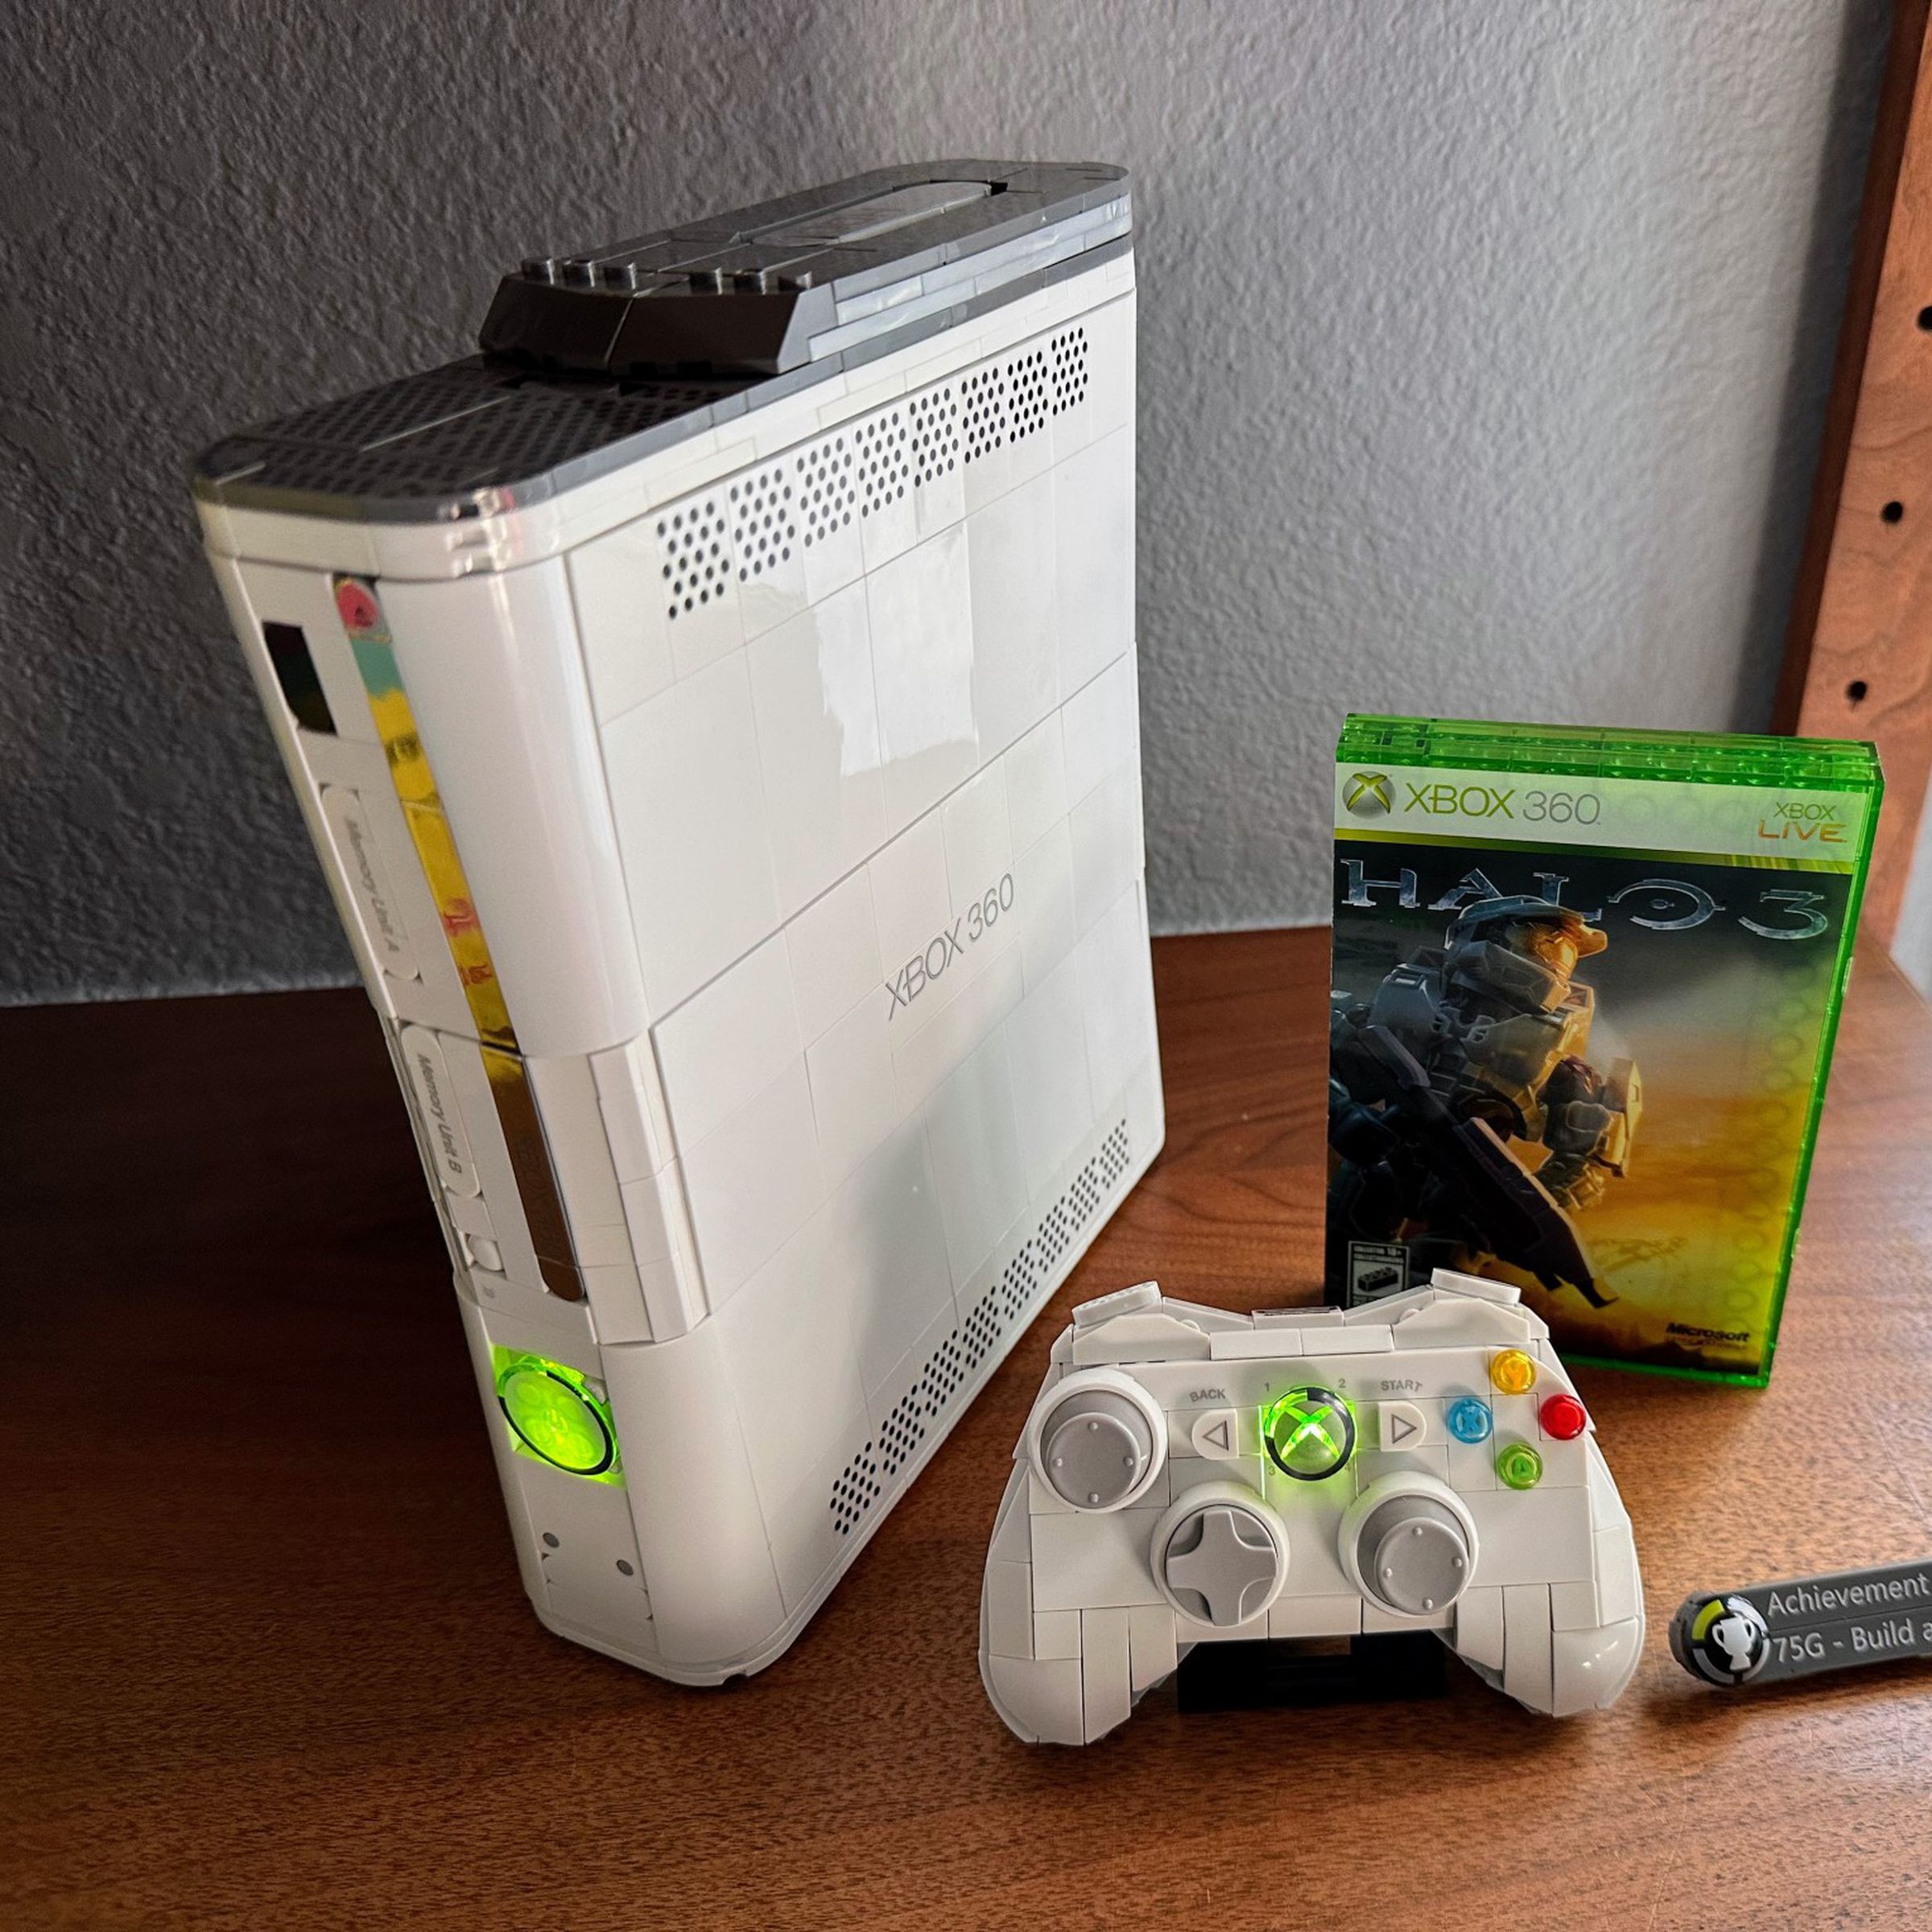 A white Xbox 360 with a hard drive, controller, and a “copy” of Halo 3 — you build them all with bricks.